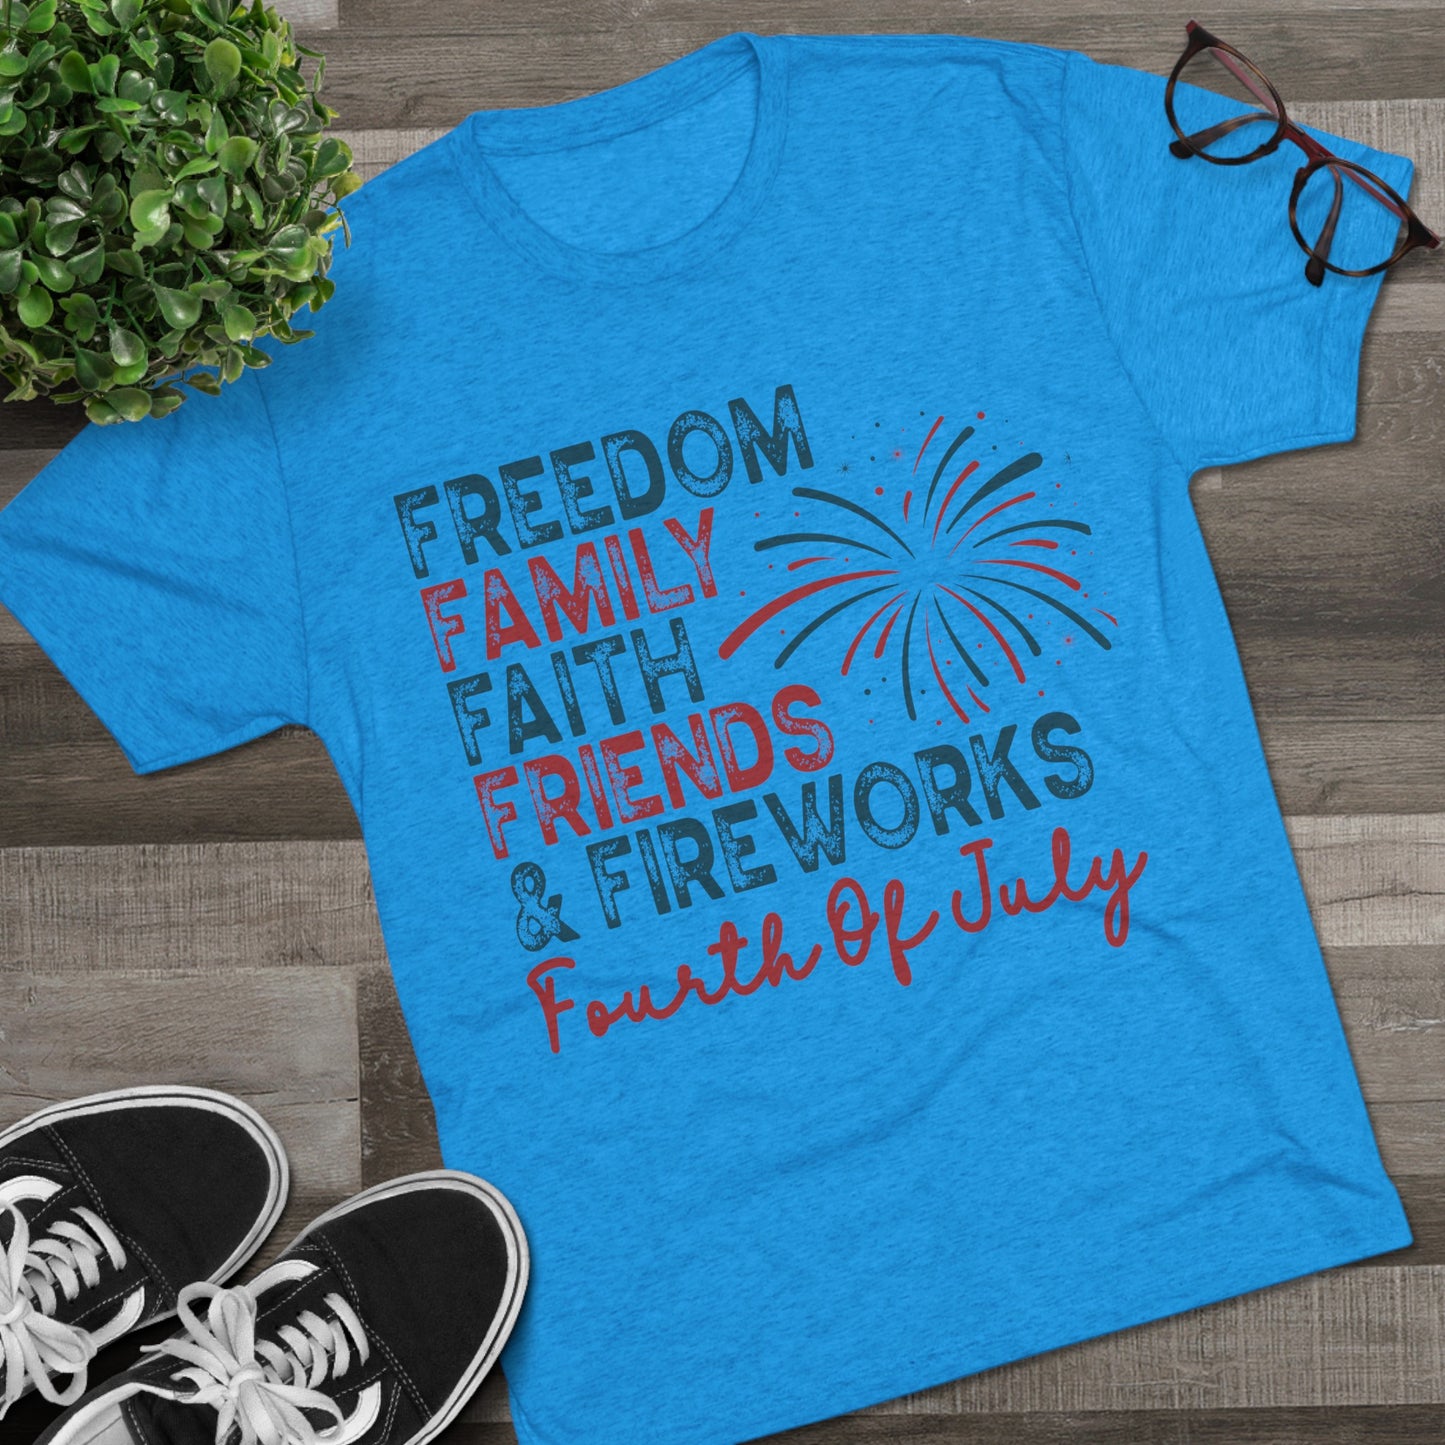 Get trendy with Freedom, Family " Unisex Tri-Blend Crew Tee - T-Shirt available at Good Gift Company. Grab yours for $21.88 today!